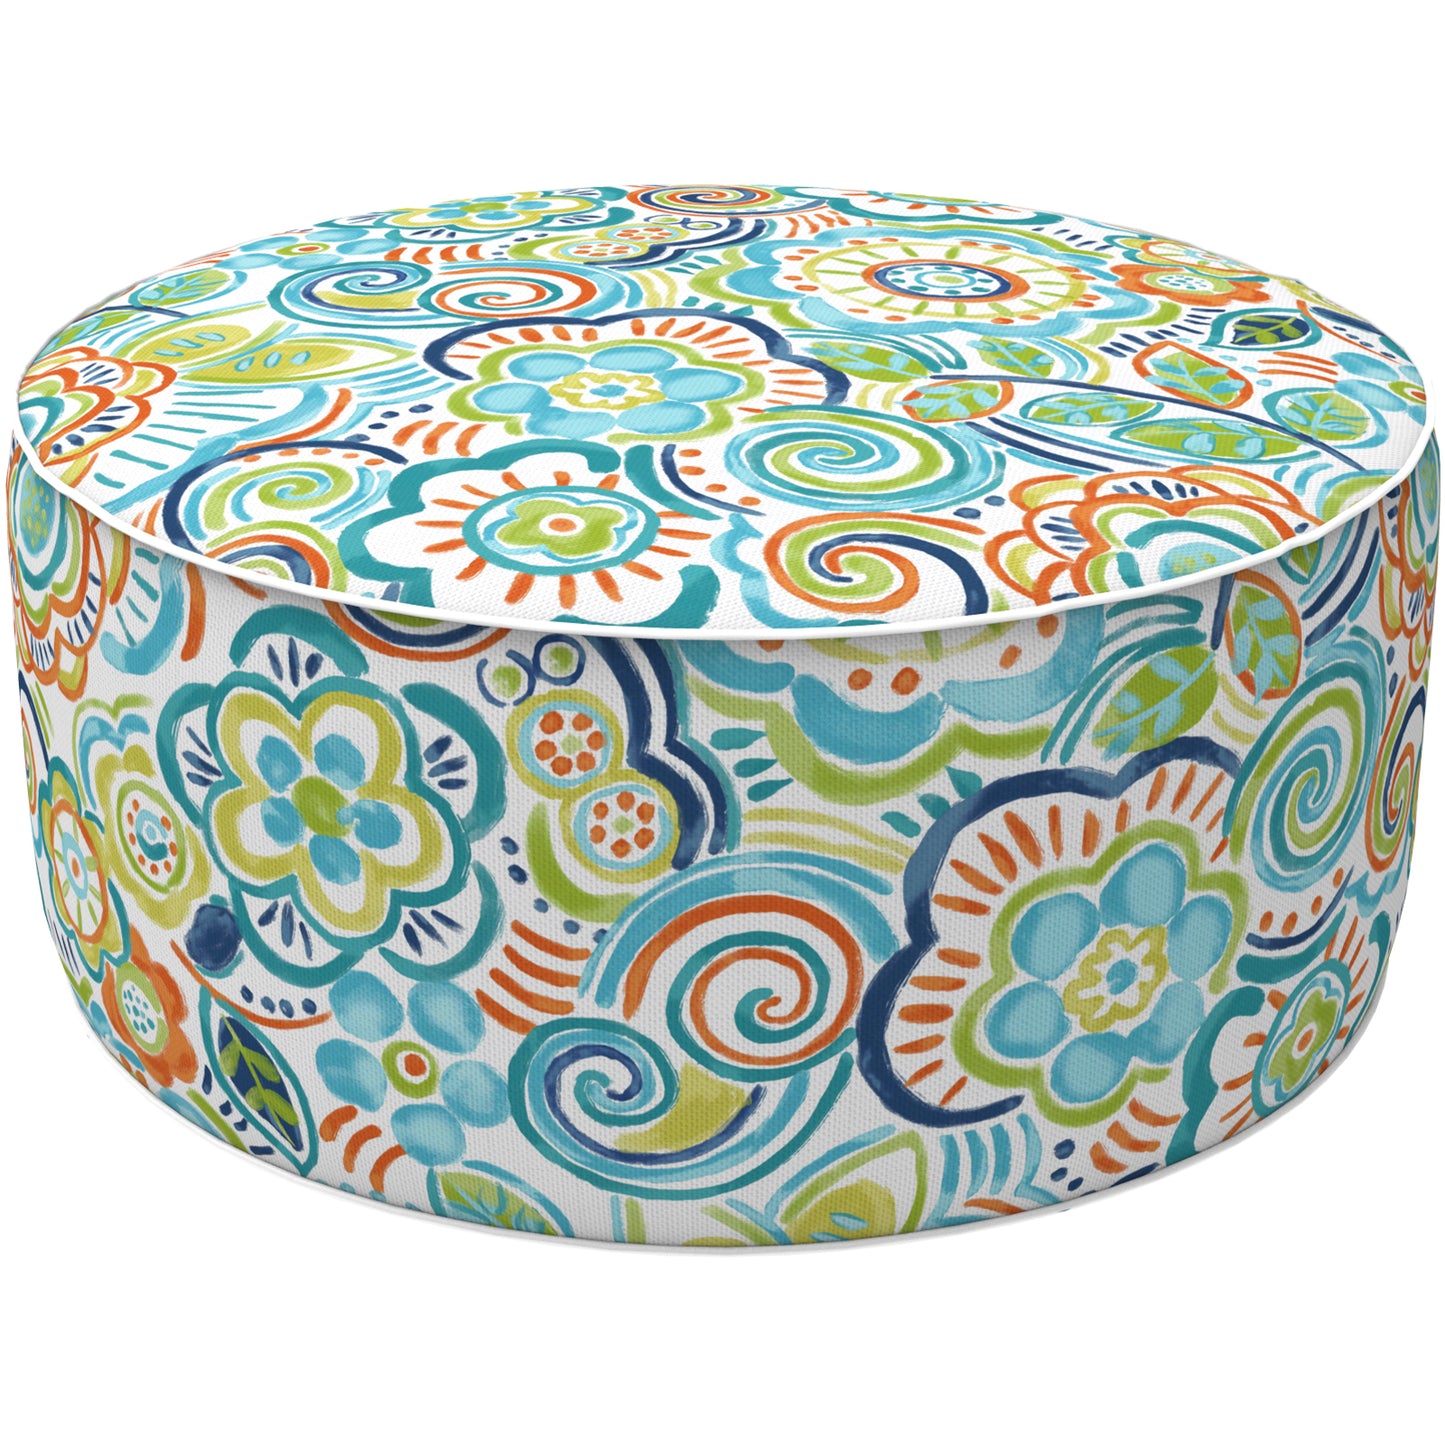 Melody Elephant Patio Inflatable Ottoman, 21x9 Inch Portable Stool Ottoman with Handle, Outdoor Round Footrest Stool for Garden Camping, Flower Blue